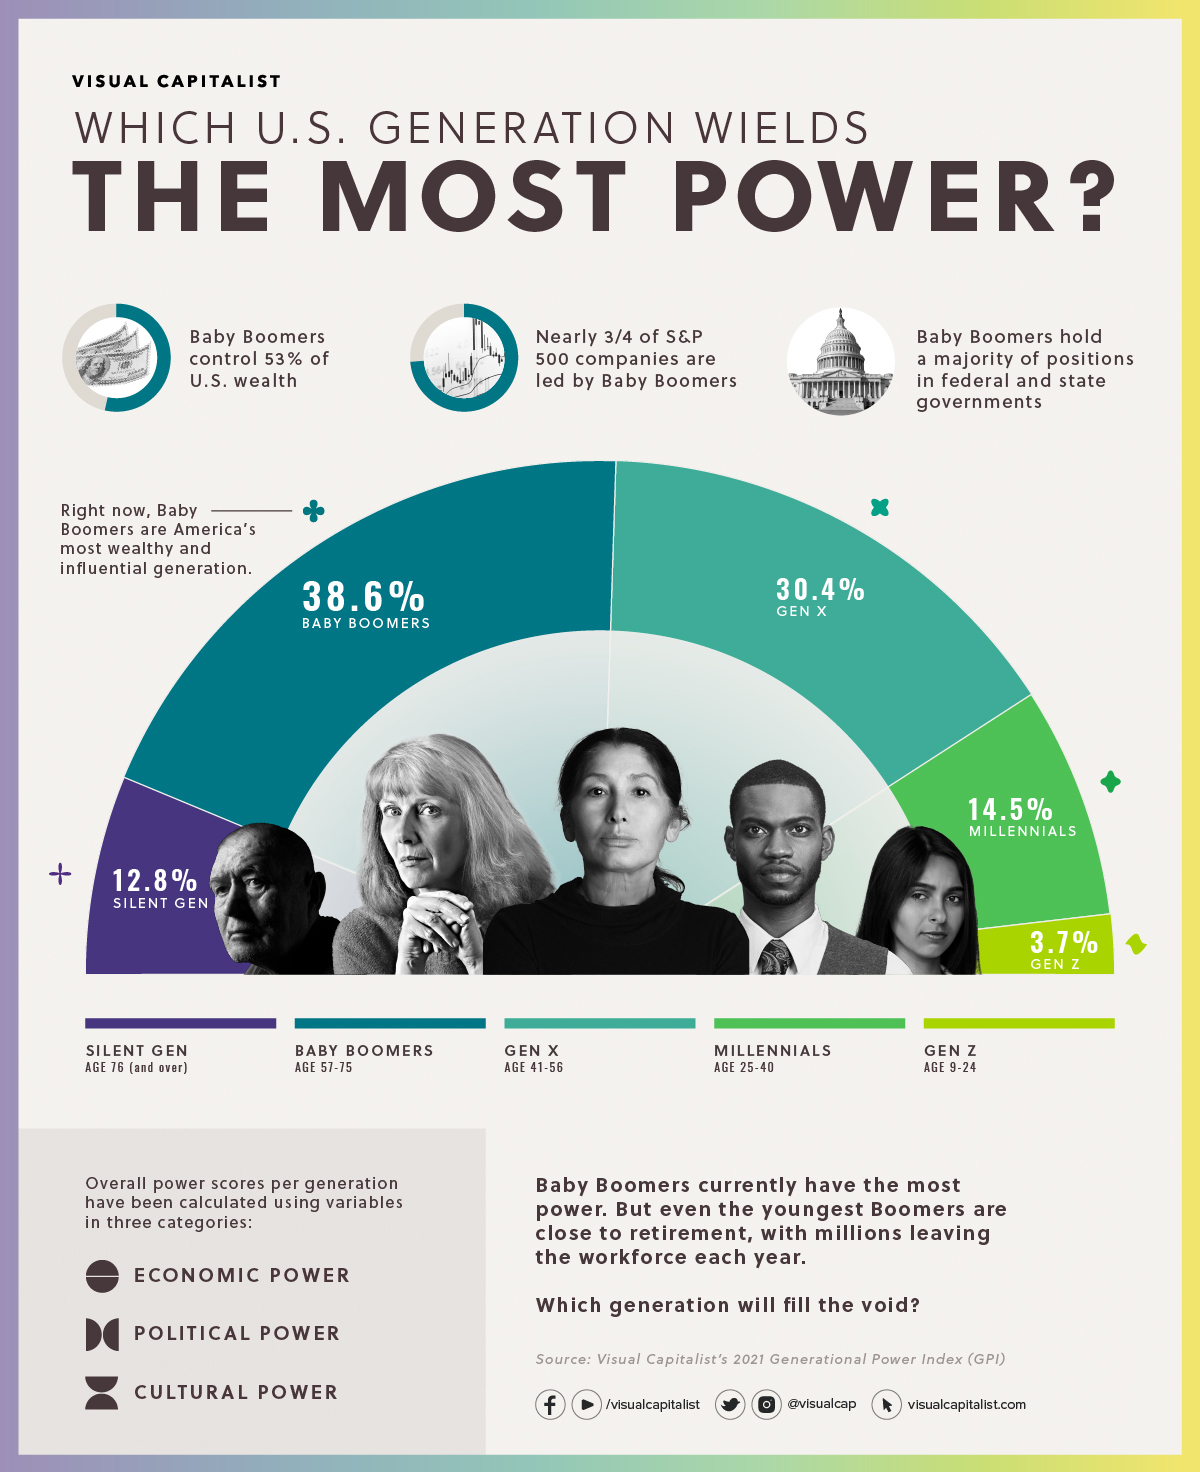 kryds amplifikation specielt Ranking U.S. Generations on Their Power and Influence Over Society